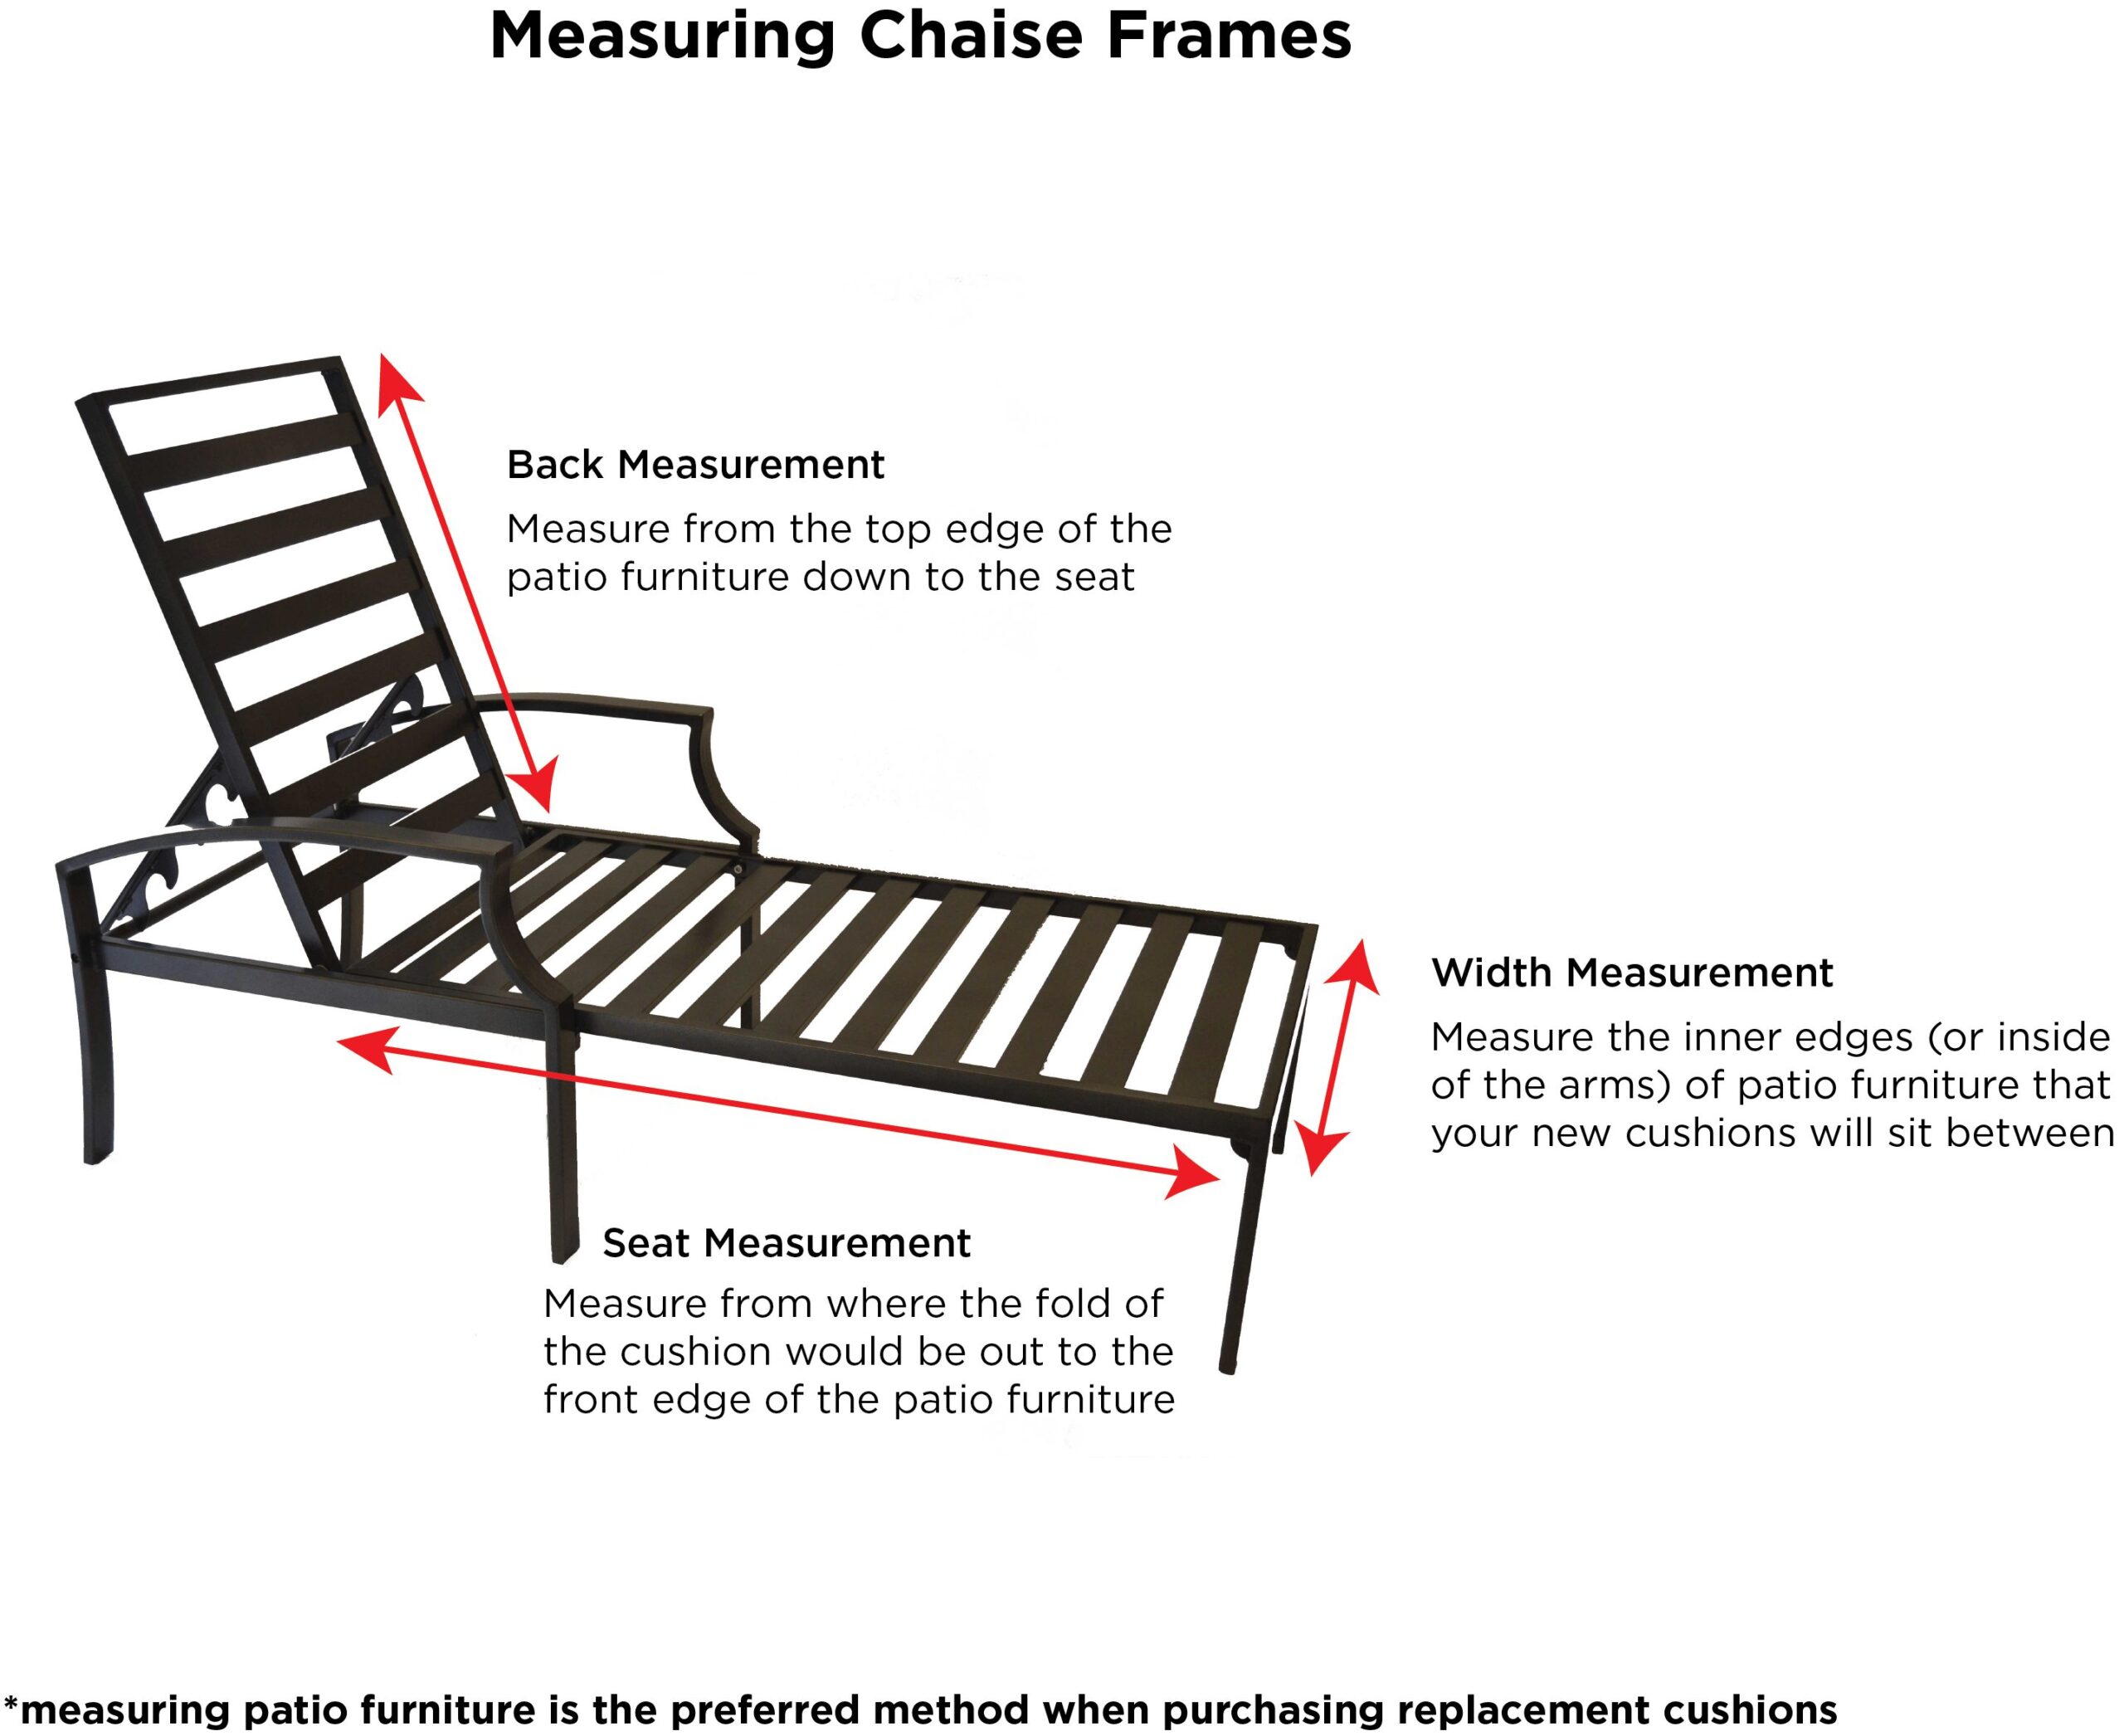 https://www.cushionconnection.com/wp-content/uploads/2021/02/How-to-Measure-Chaise-Frame-scaled.jpg